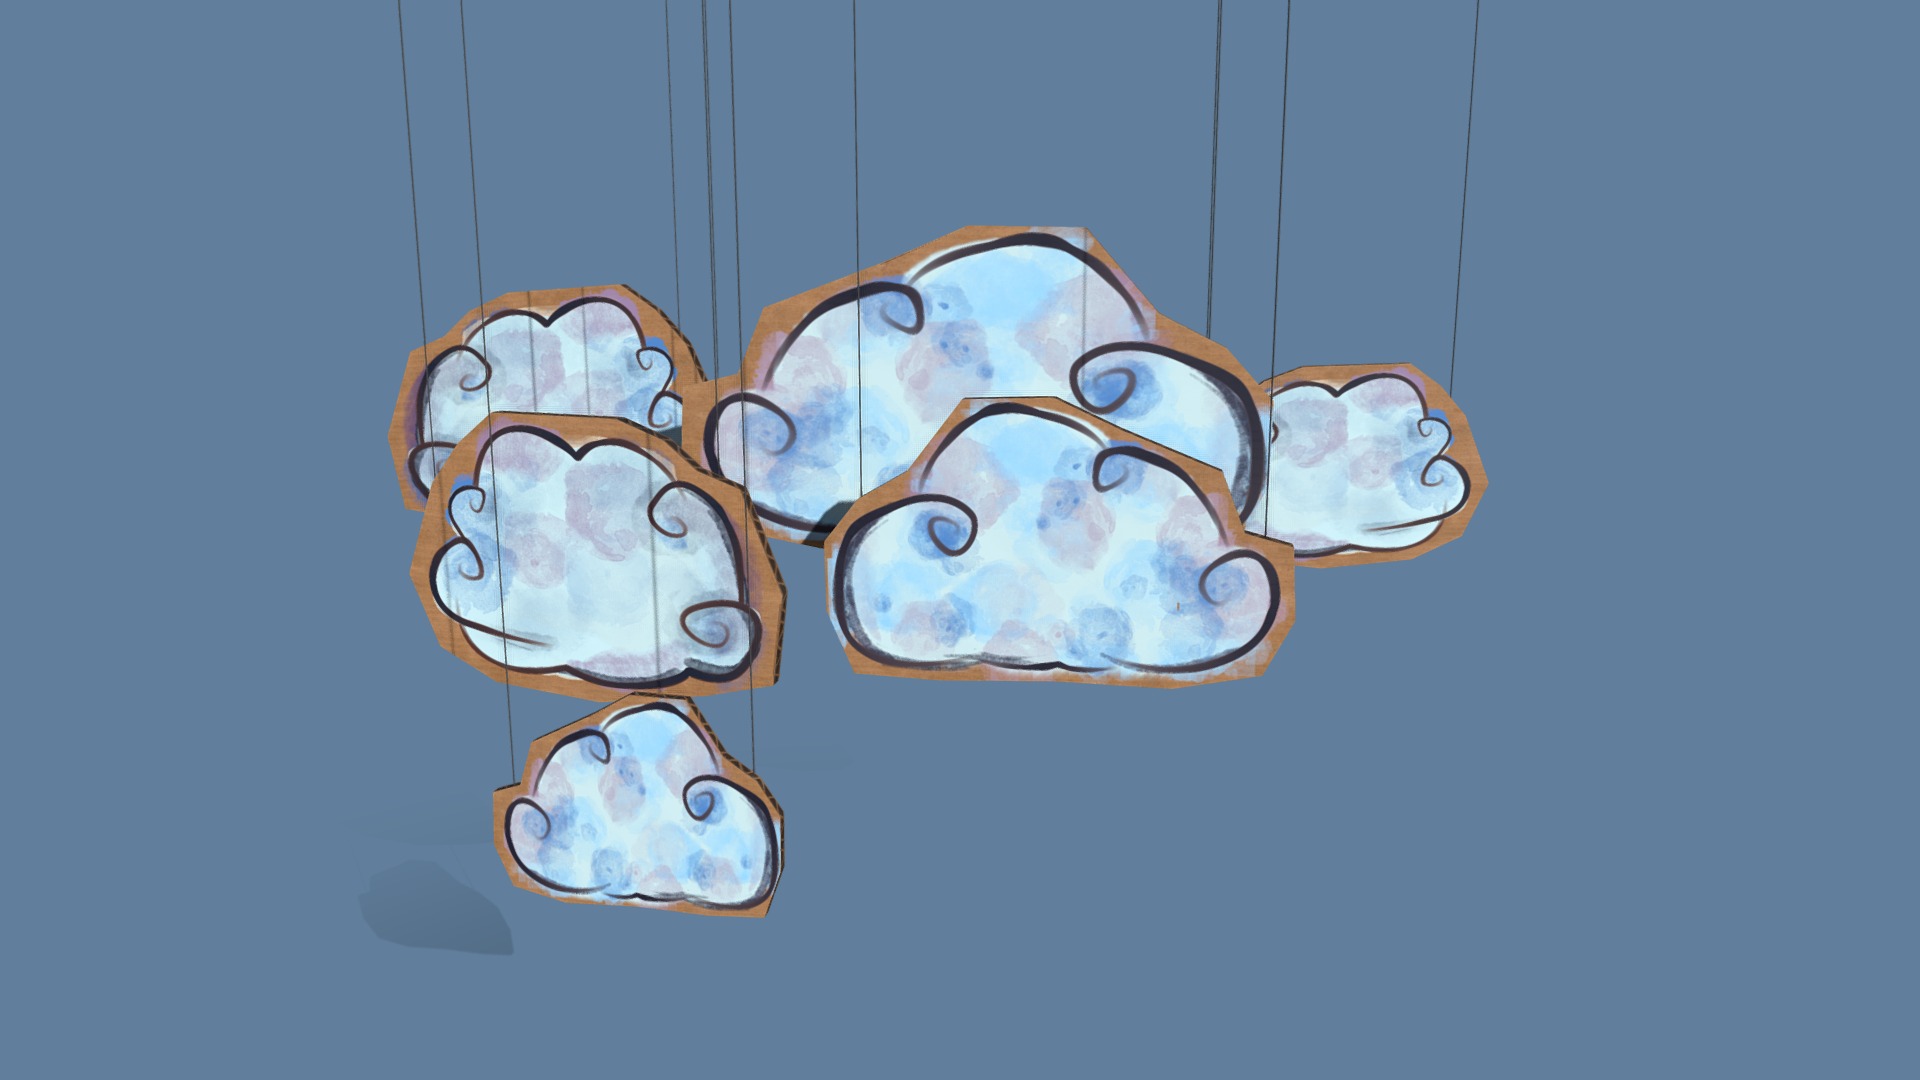 Cartoon style theatre clouds for any musical out there :)

The model is made in Maya and the texture in Photoshop and Substance Painter 3d model